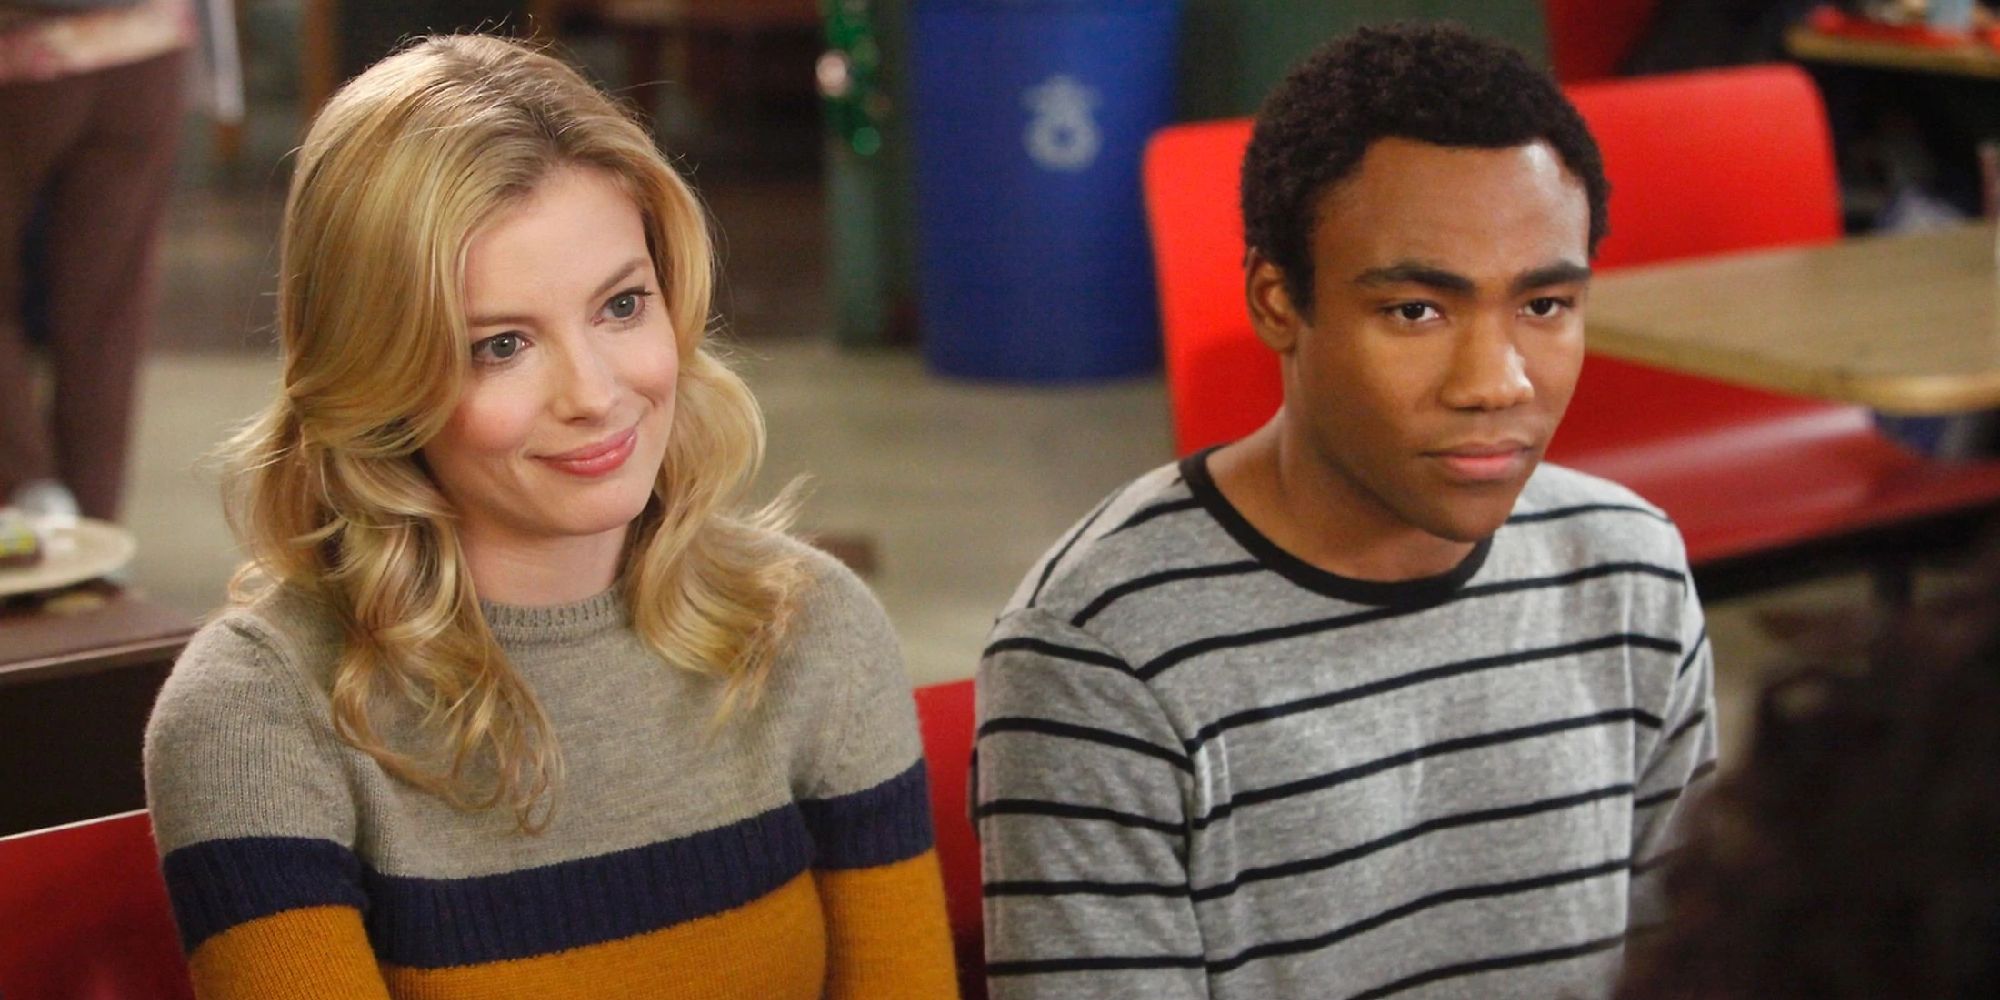 Donald Glover as Troy sitting next to Gillian Jacobs as Britta in Greendale's cafeteria on Community